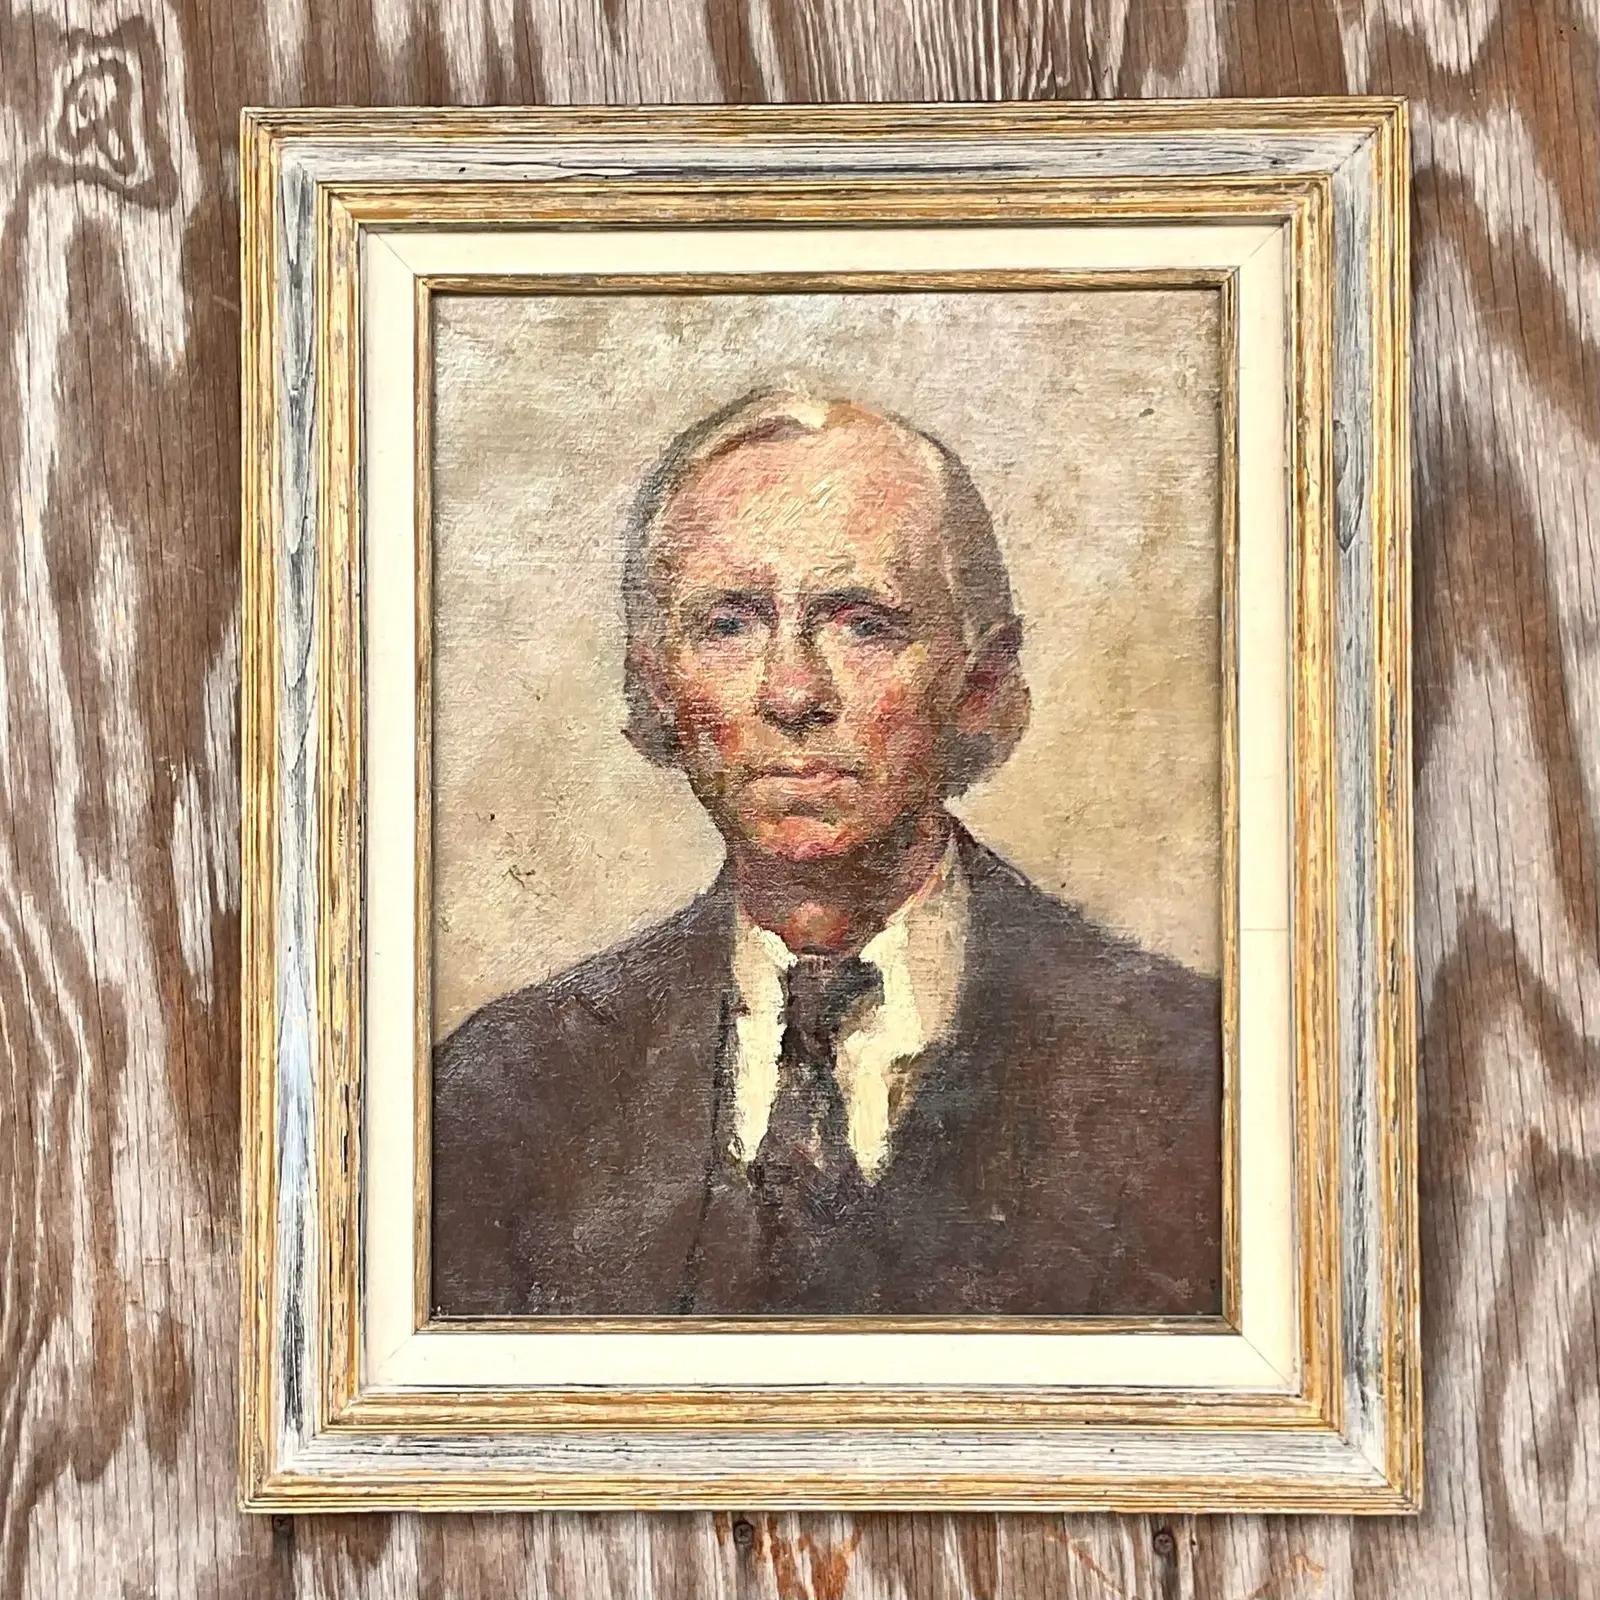 A fabulous vintage Boho original oil painting. A chic portrait of a fine gentleman. Unsigned. Acquired from a Palm Beach estate.